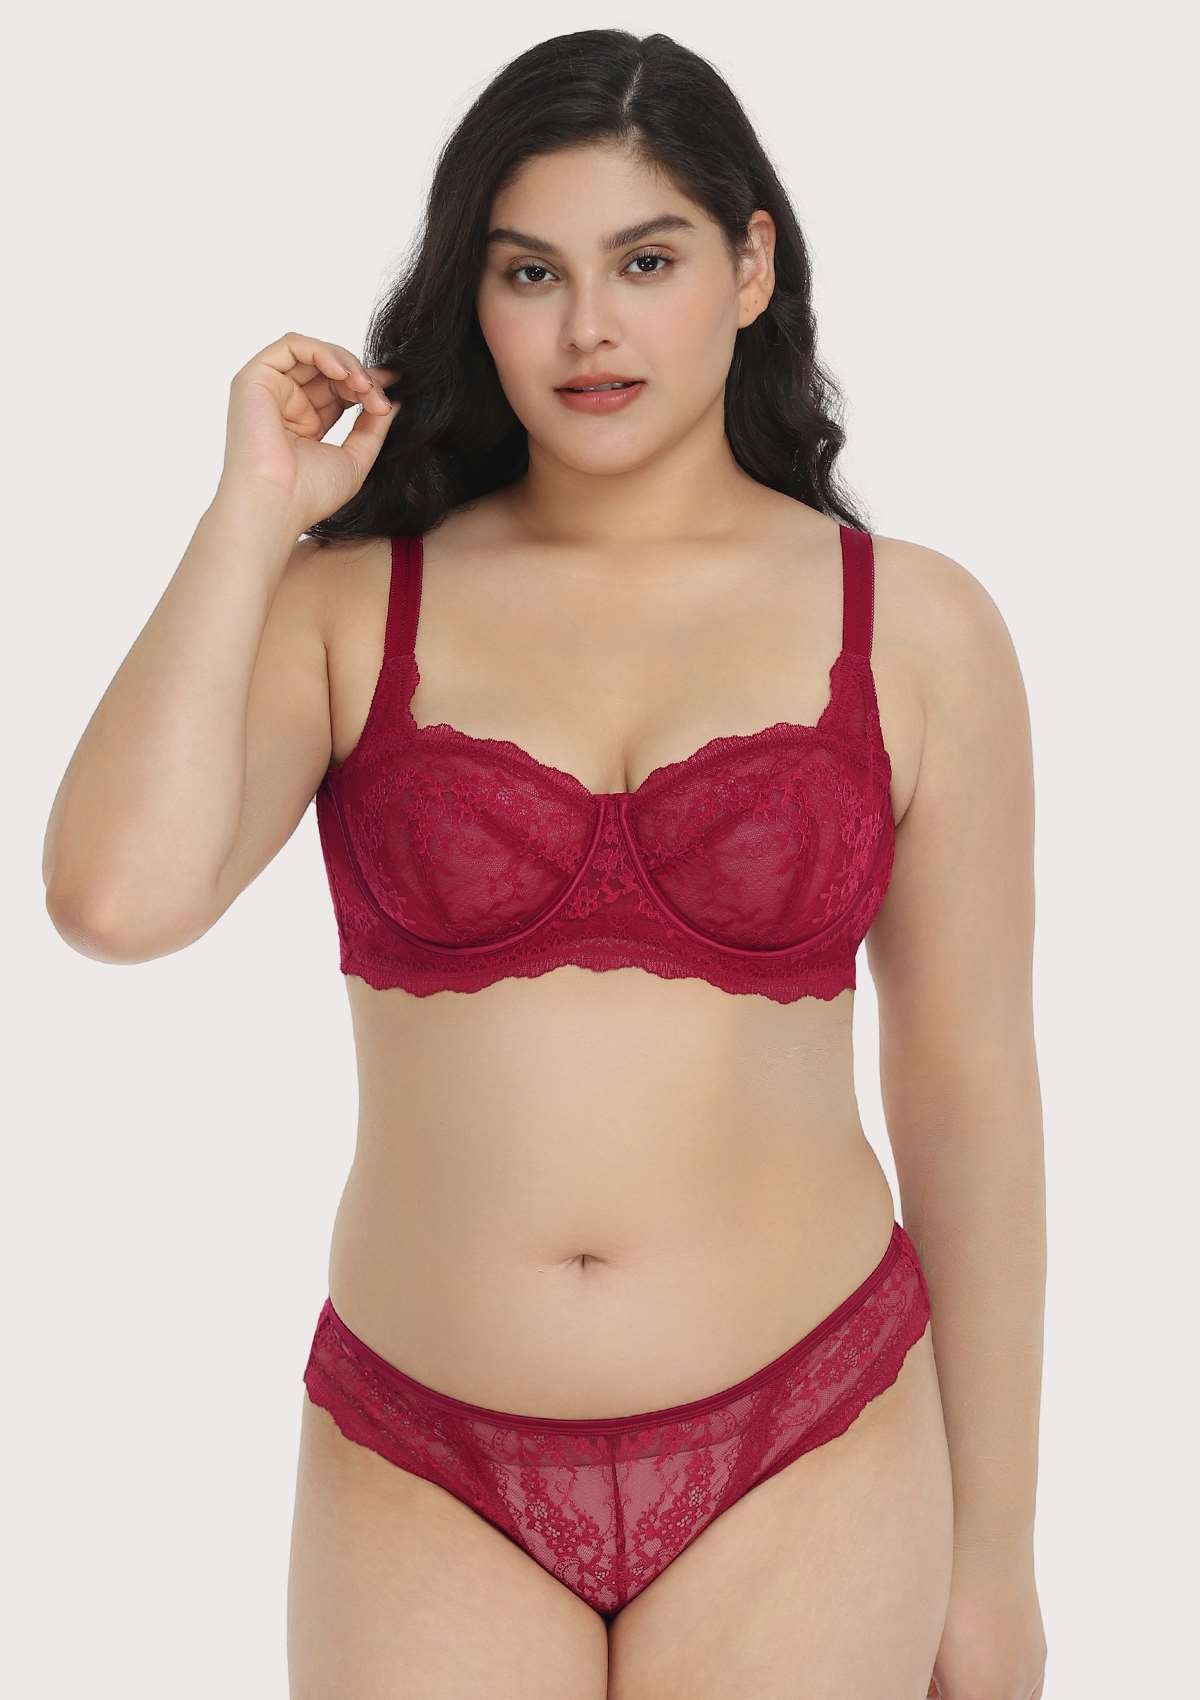 HSIA Floral Lace Unlined Bridal Balconette Bra Set - Supportive Classic - Burgundy / 34 / C